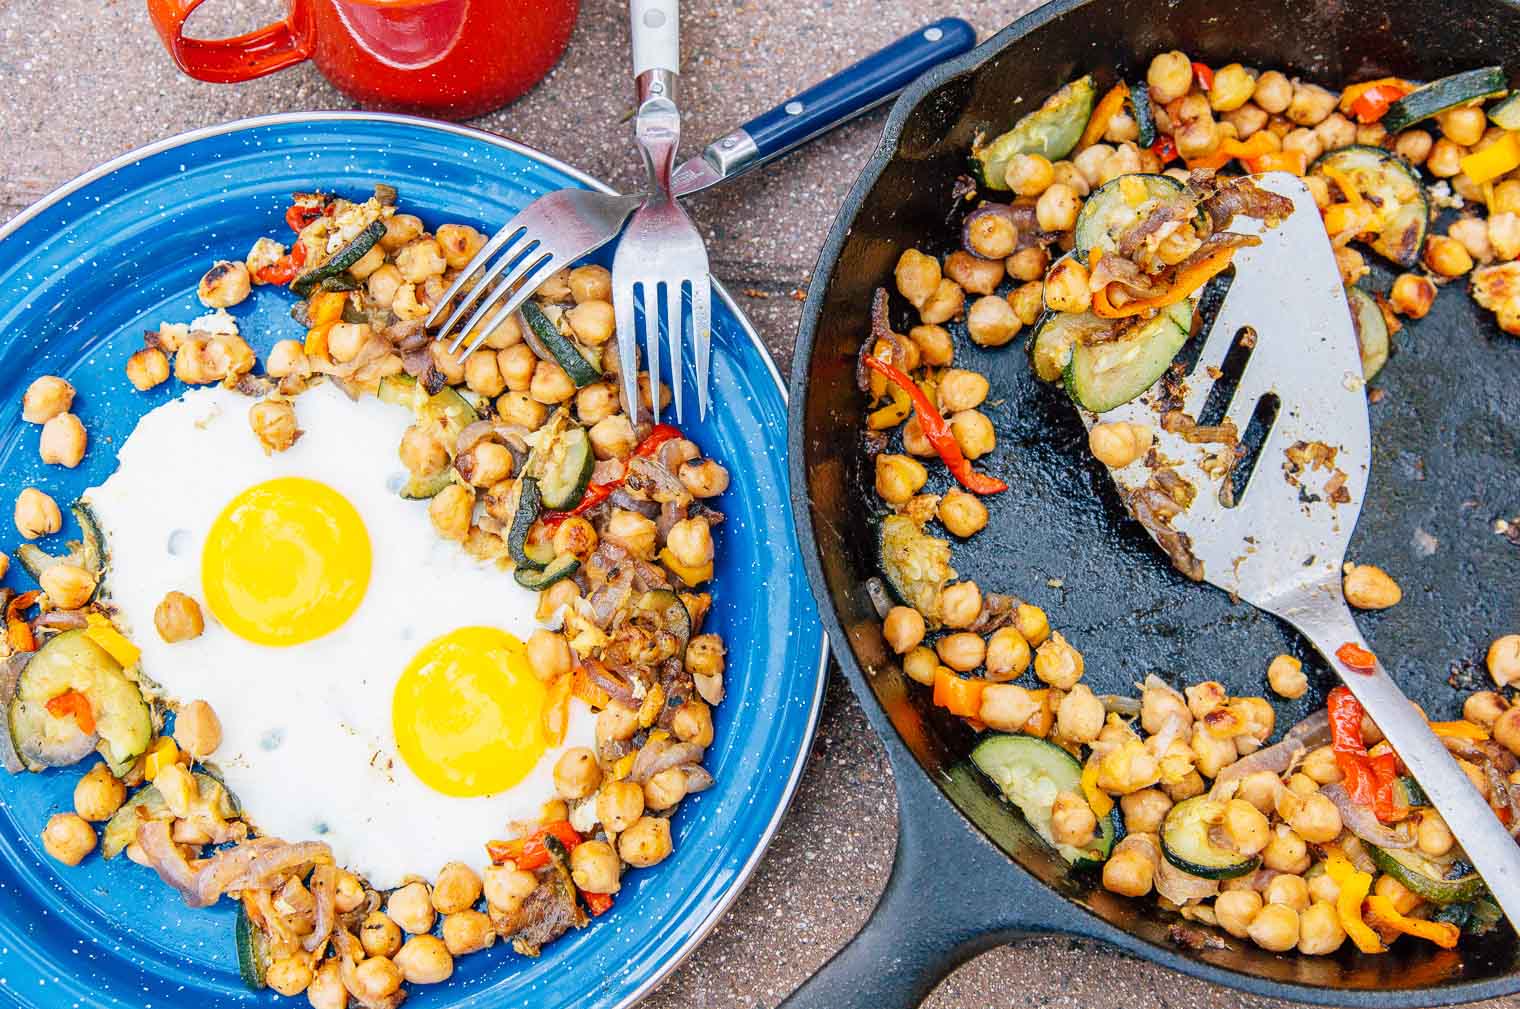 Breakfast hash on a blue enamelware camping plate next to a cast iron skillet